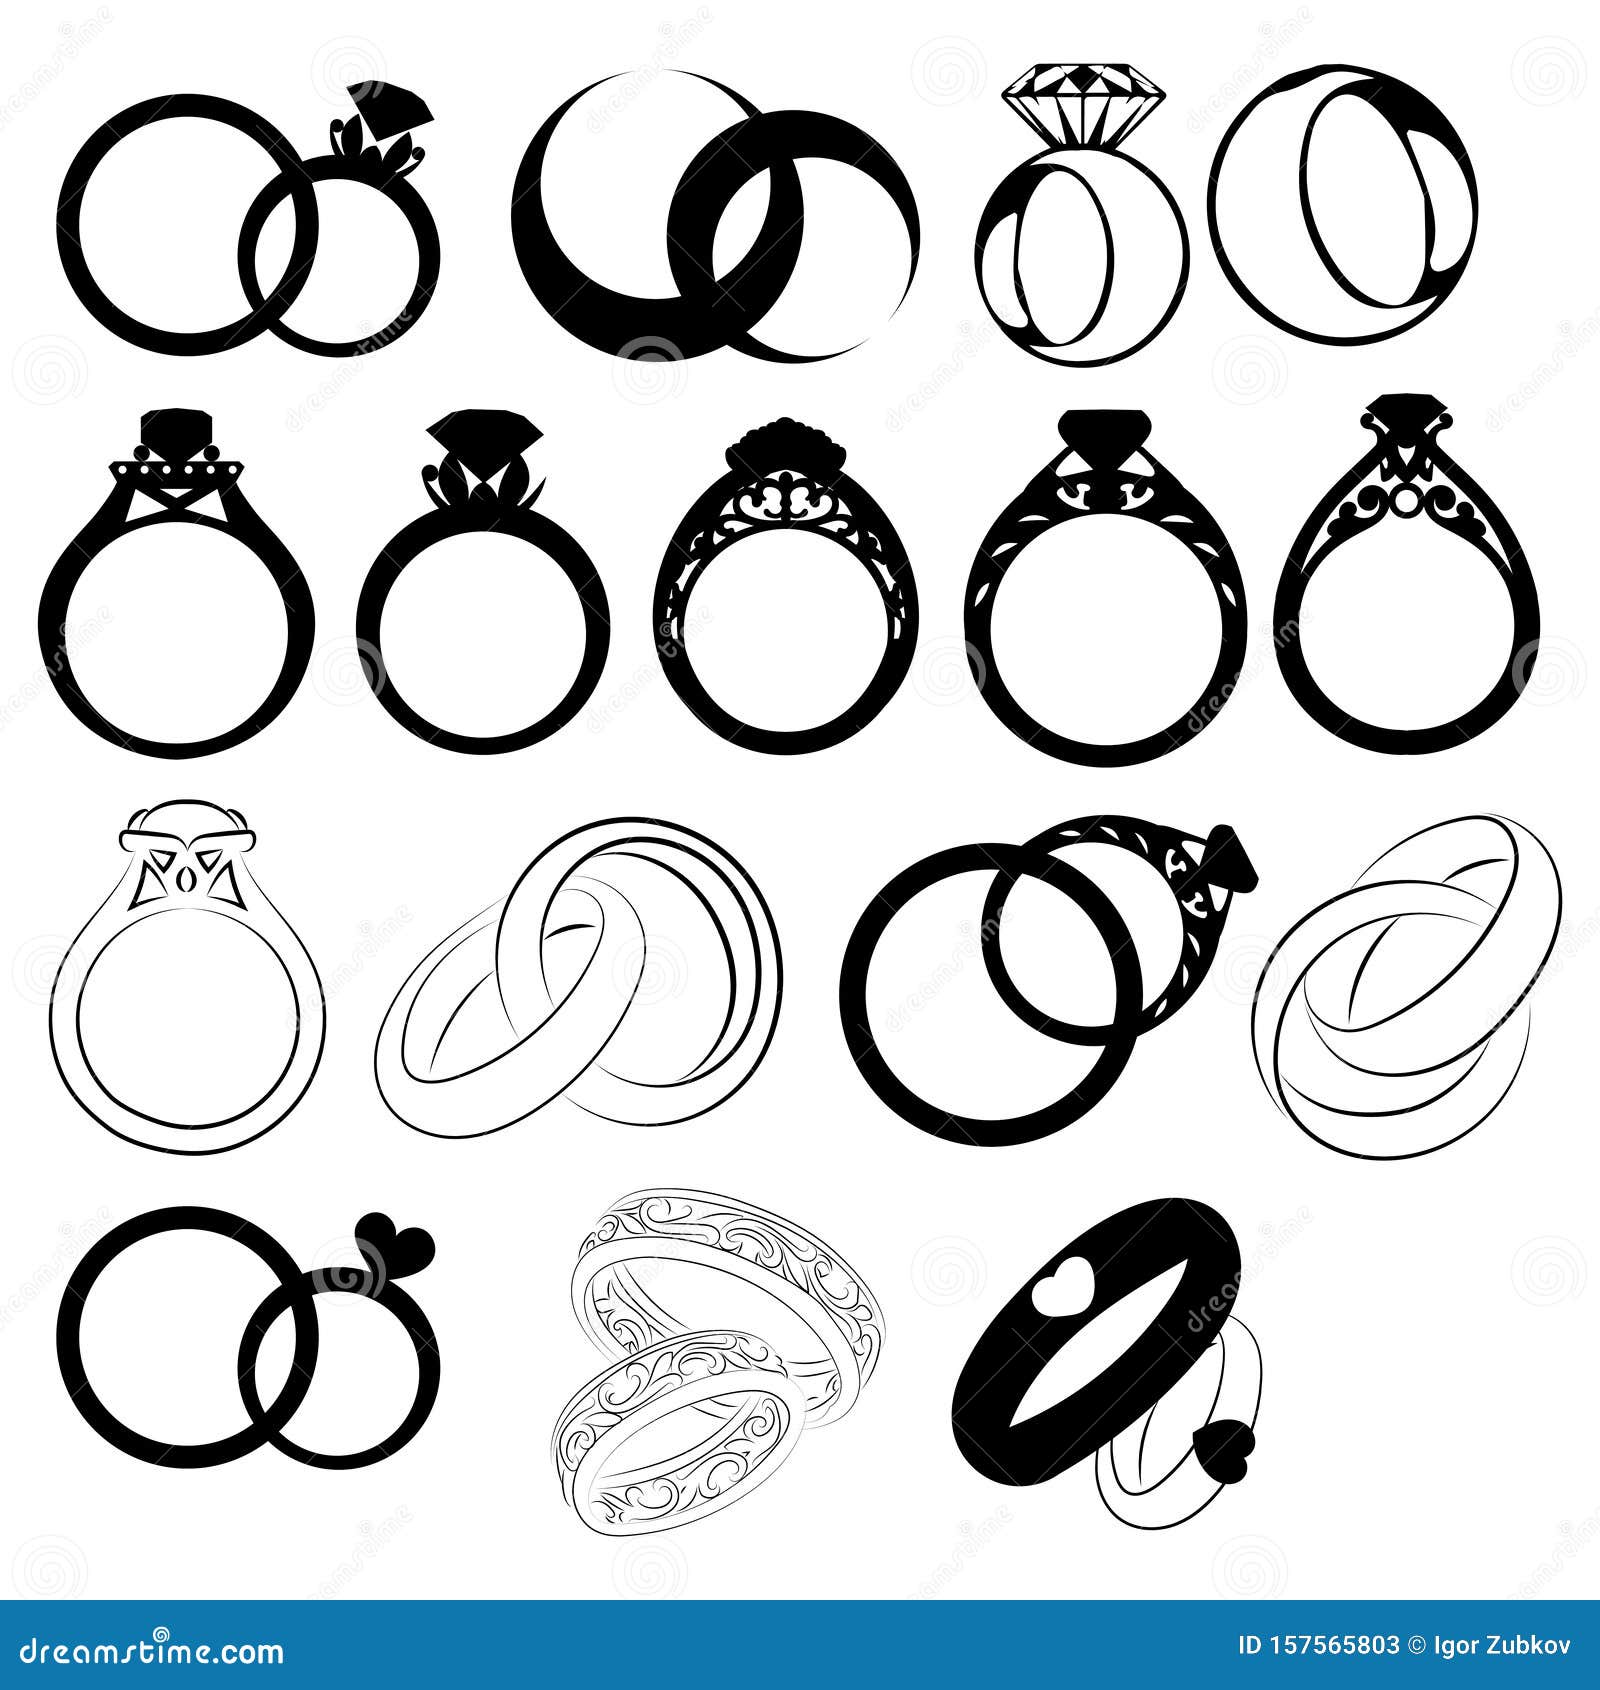 Flat icon in black and white style wedding rings Vector Image